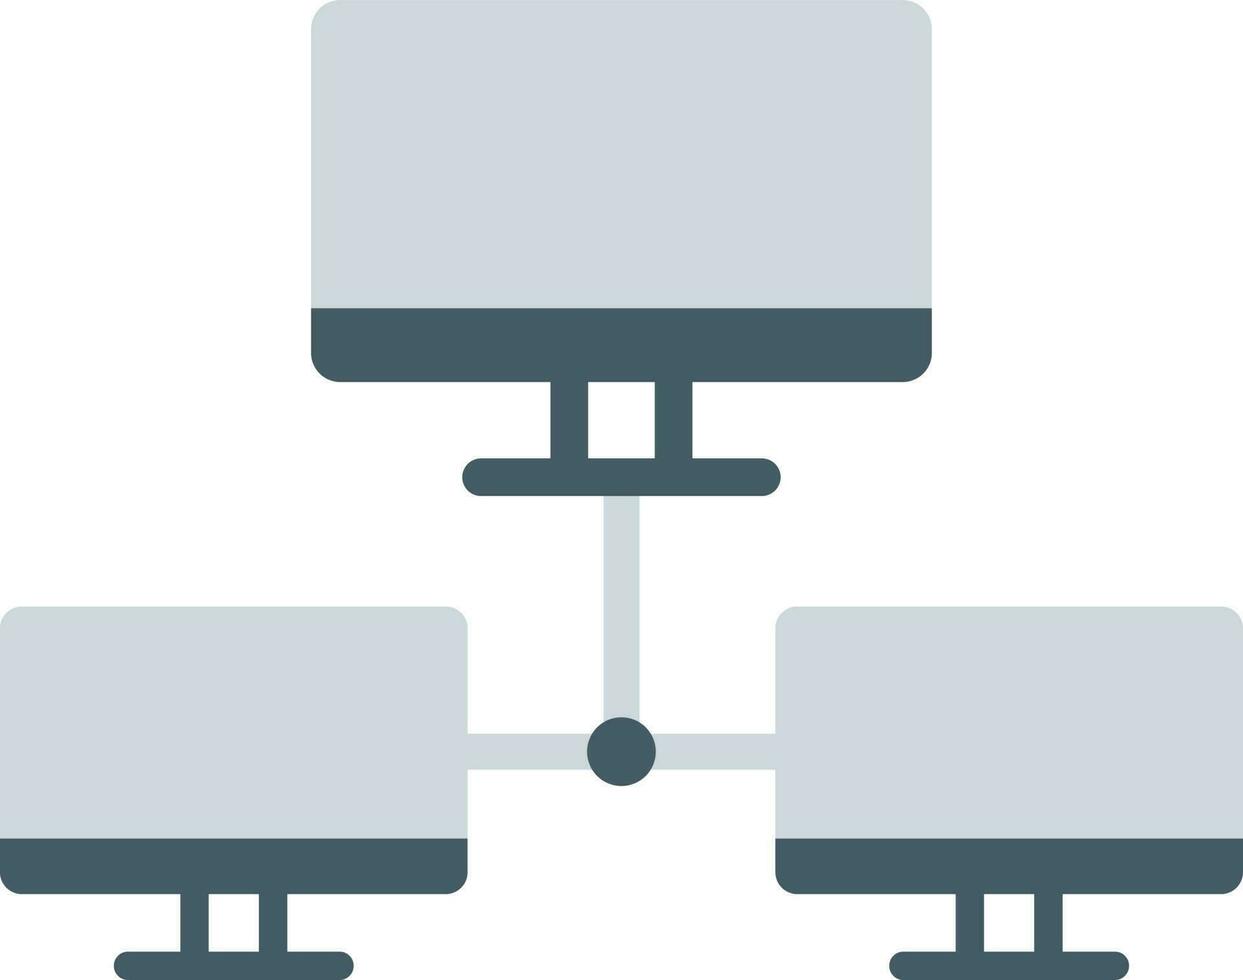 Systems Network icon vector image. Suitable for mobile apps, web apps and print media.